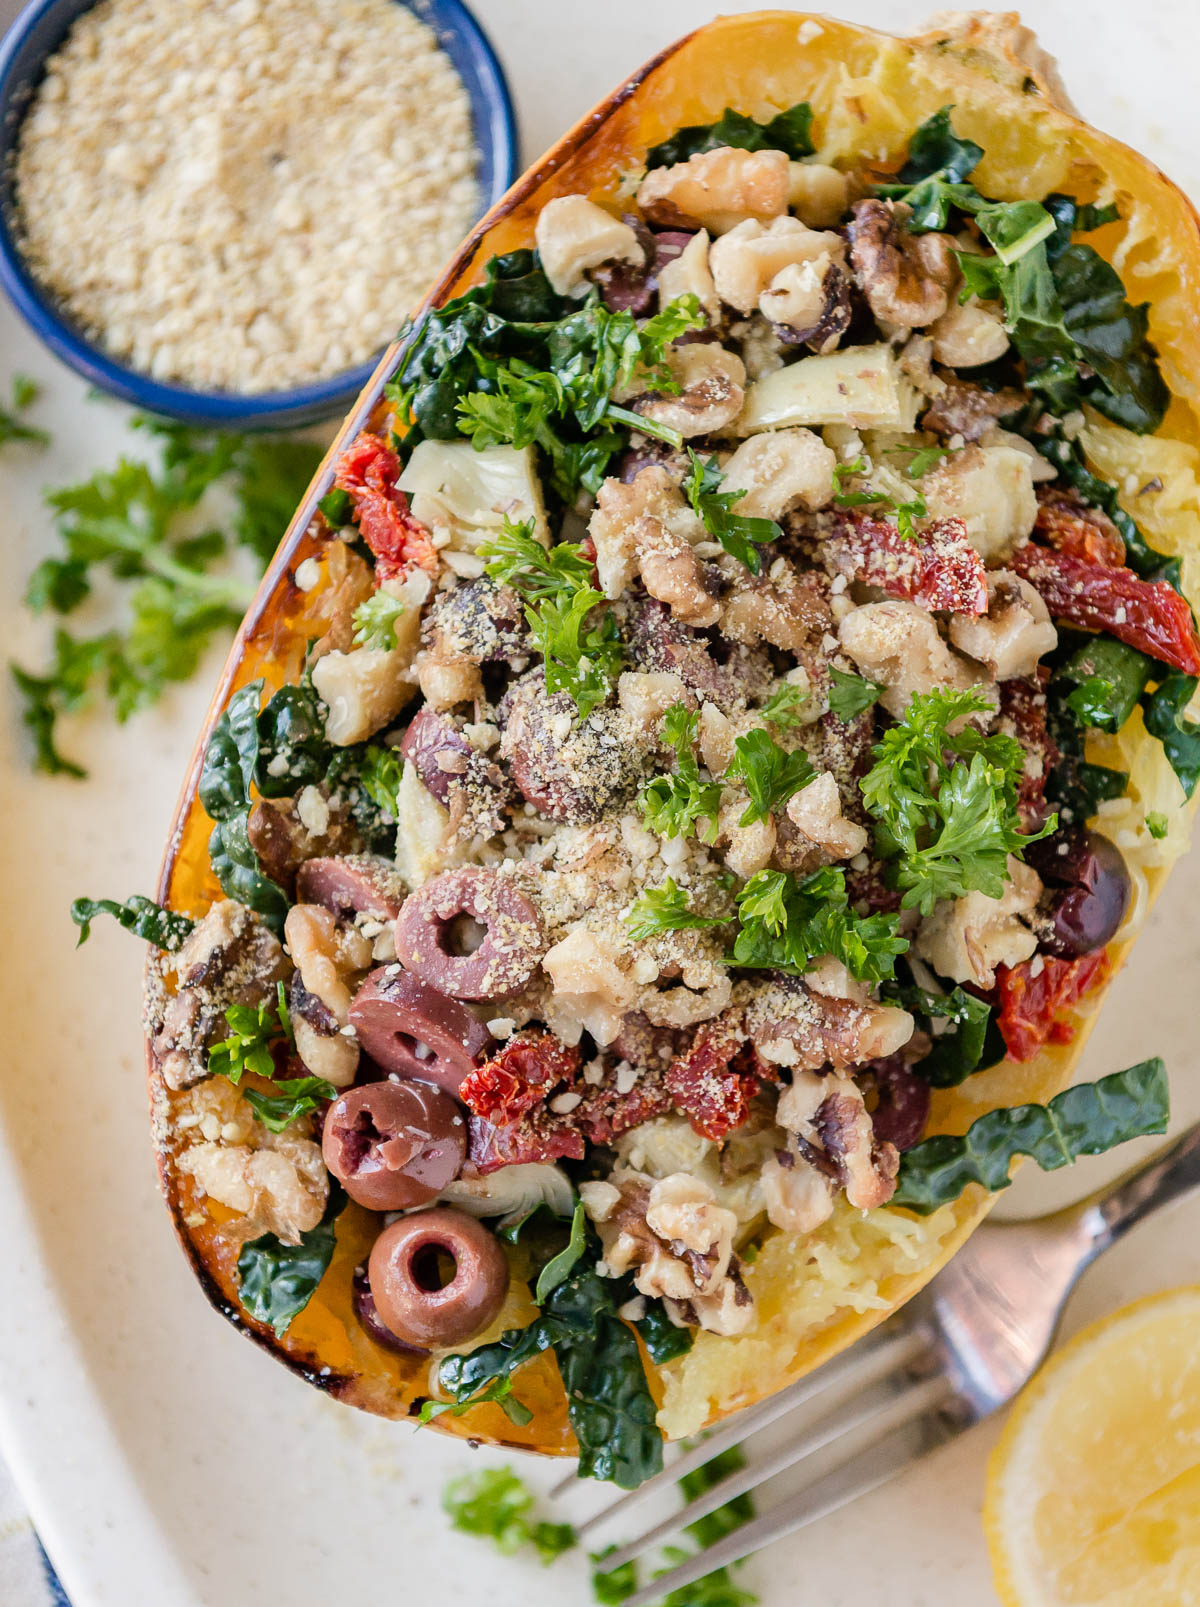 half of a spaghetti squash topped with walnuts, sun-dried tomatoes, kale, artichokes and more.